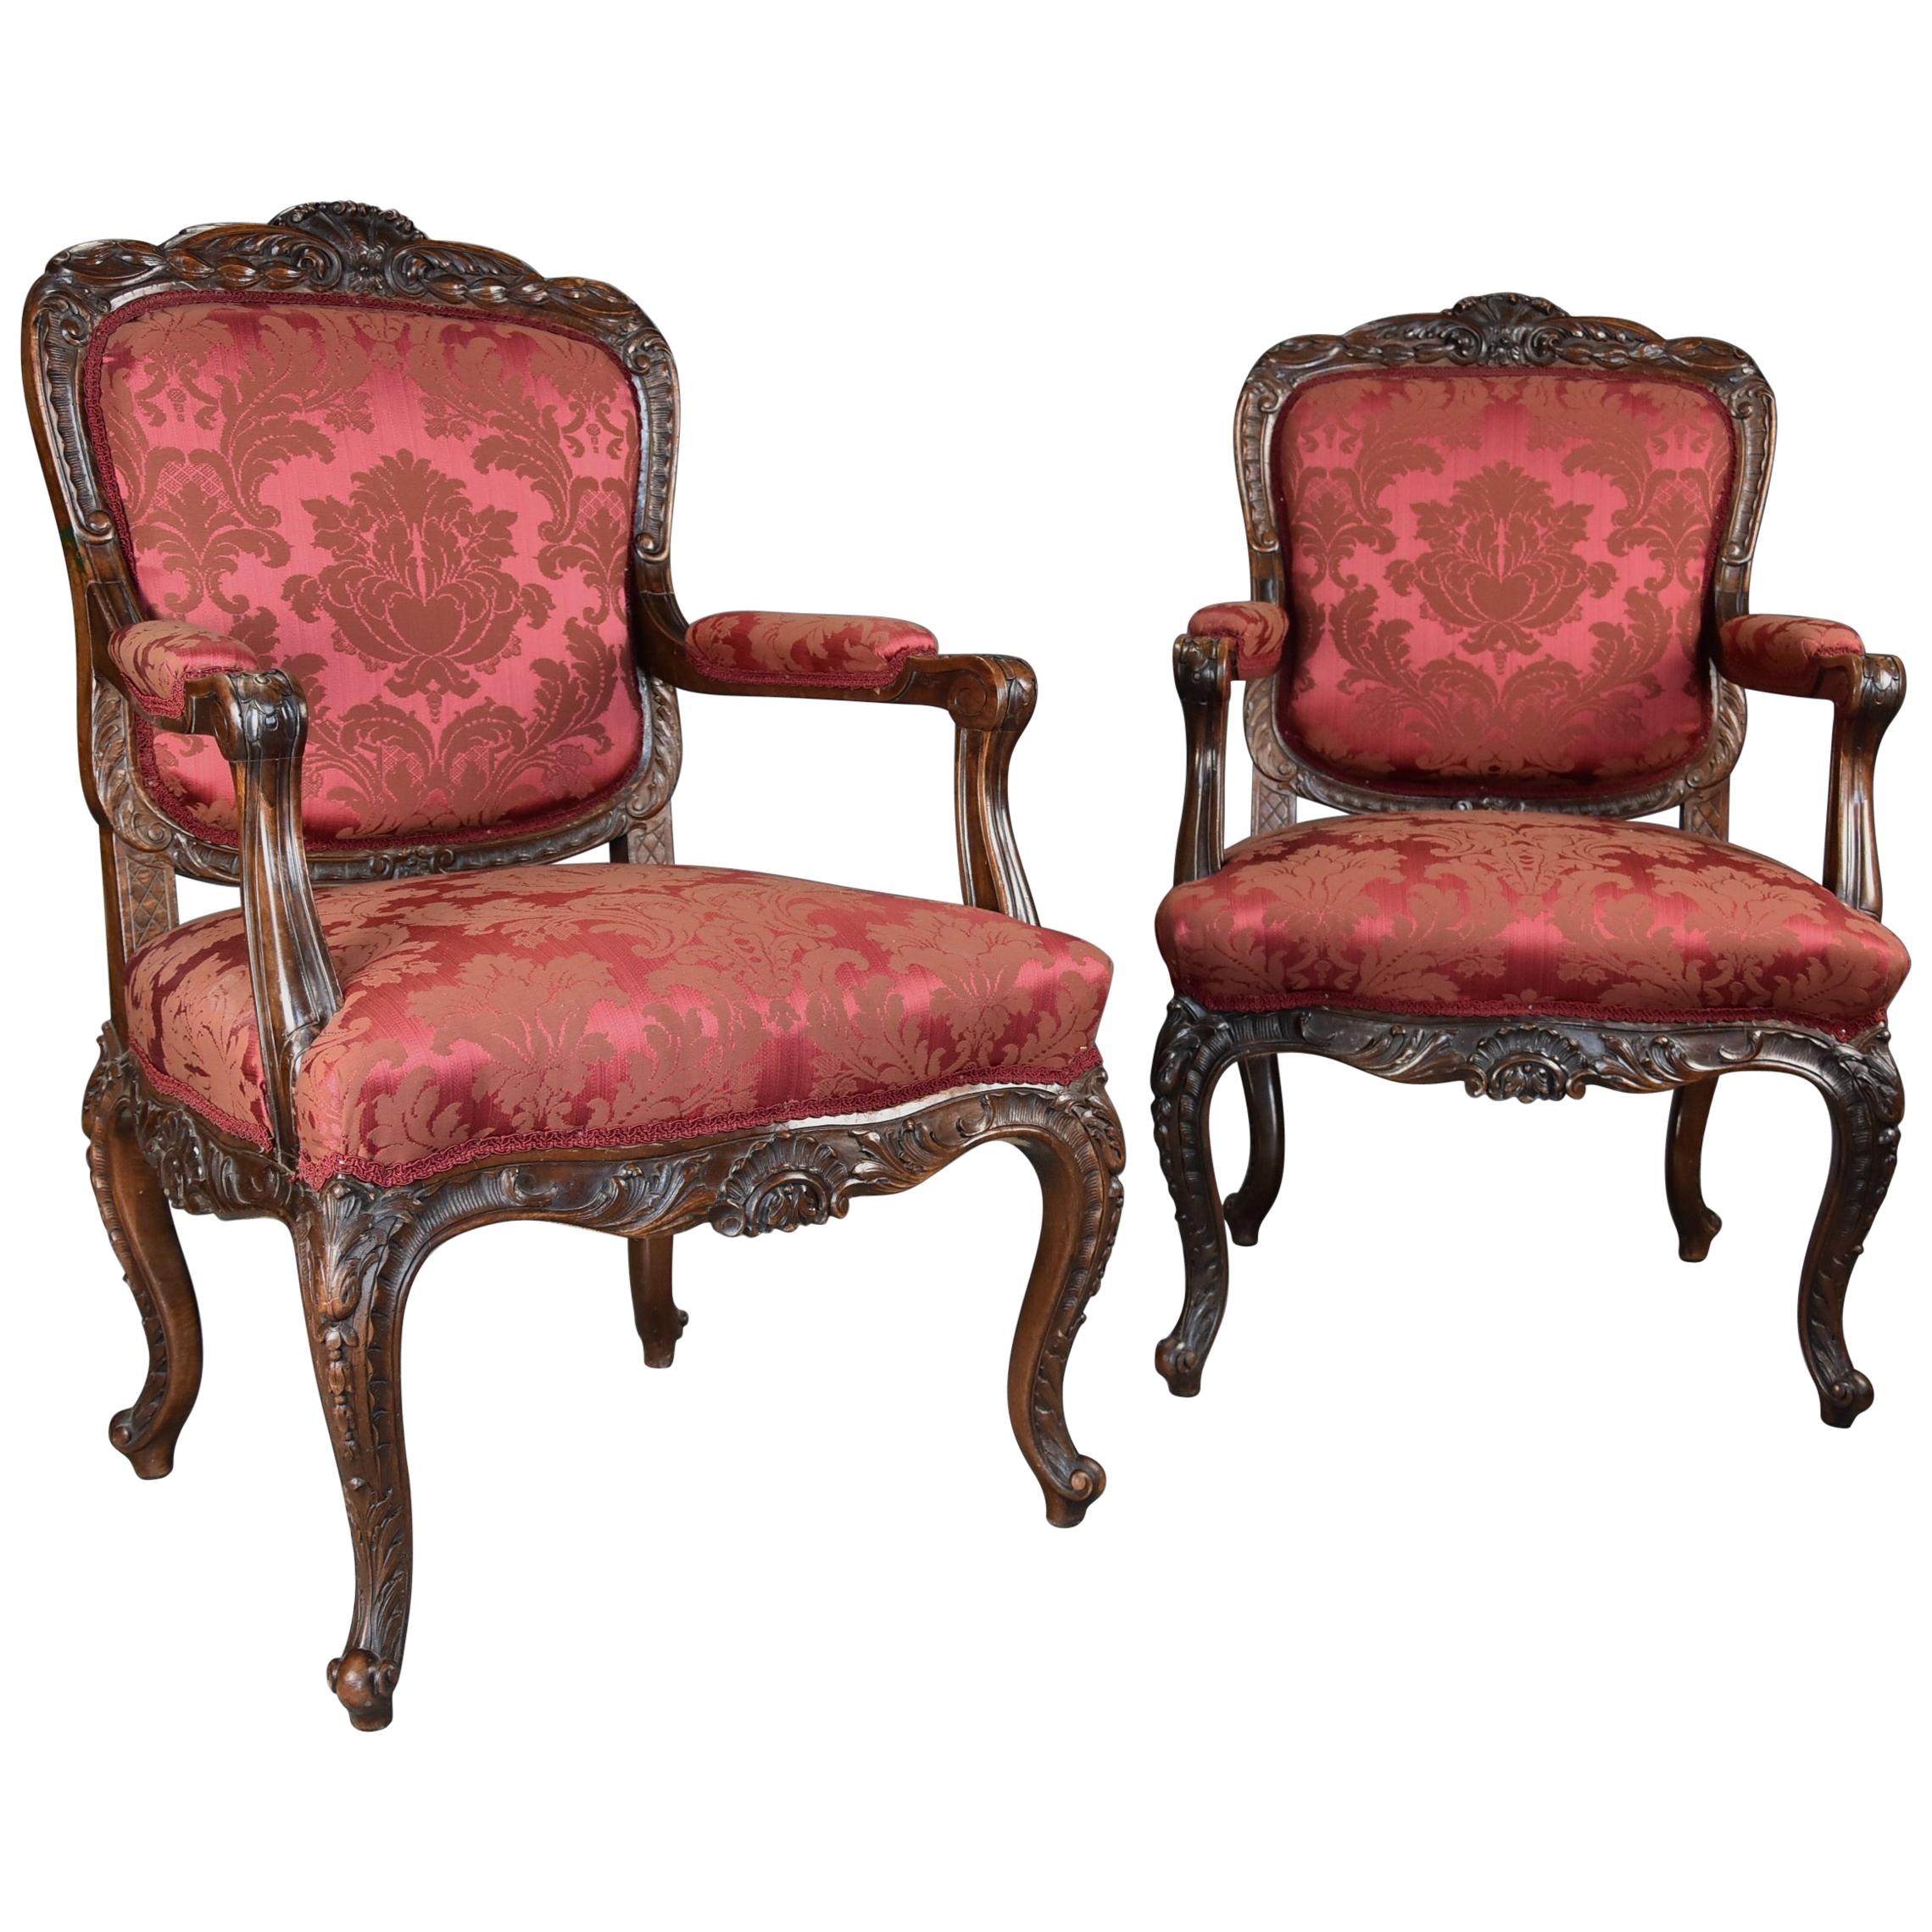 Pair of Fine Quality French, 19th Century Walnut Fauteuils or Open Armchairs